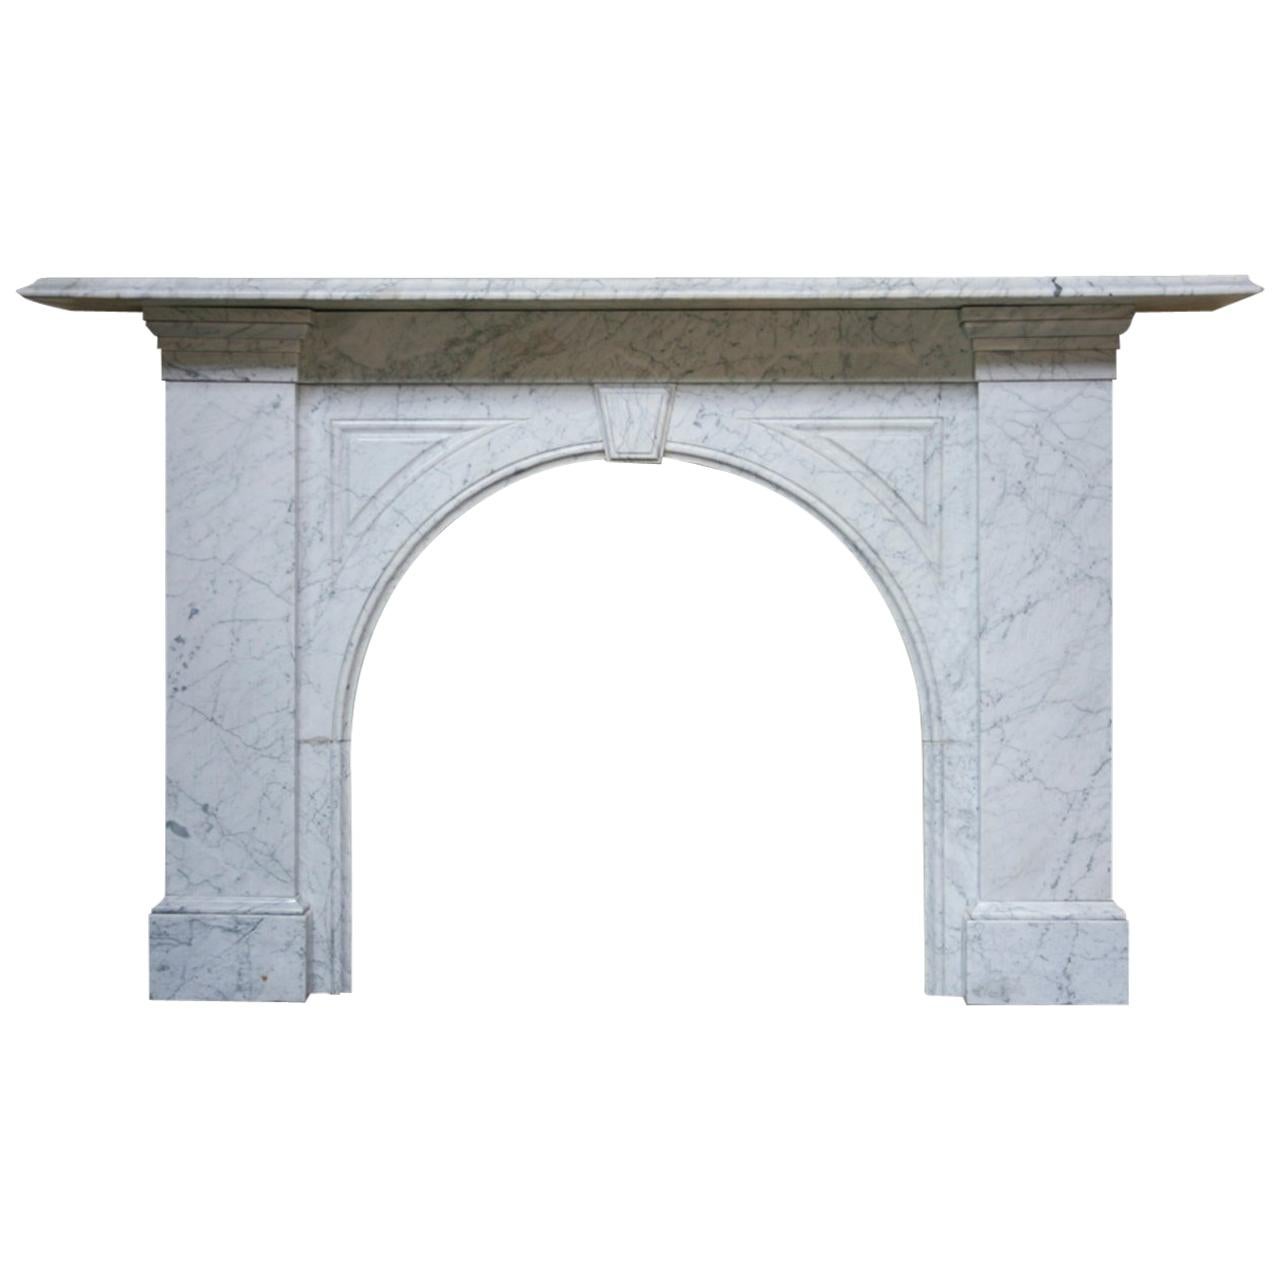 Antique reclaimed Victorian Carrara marble fire surround with arched aperture